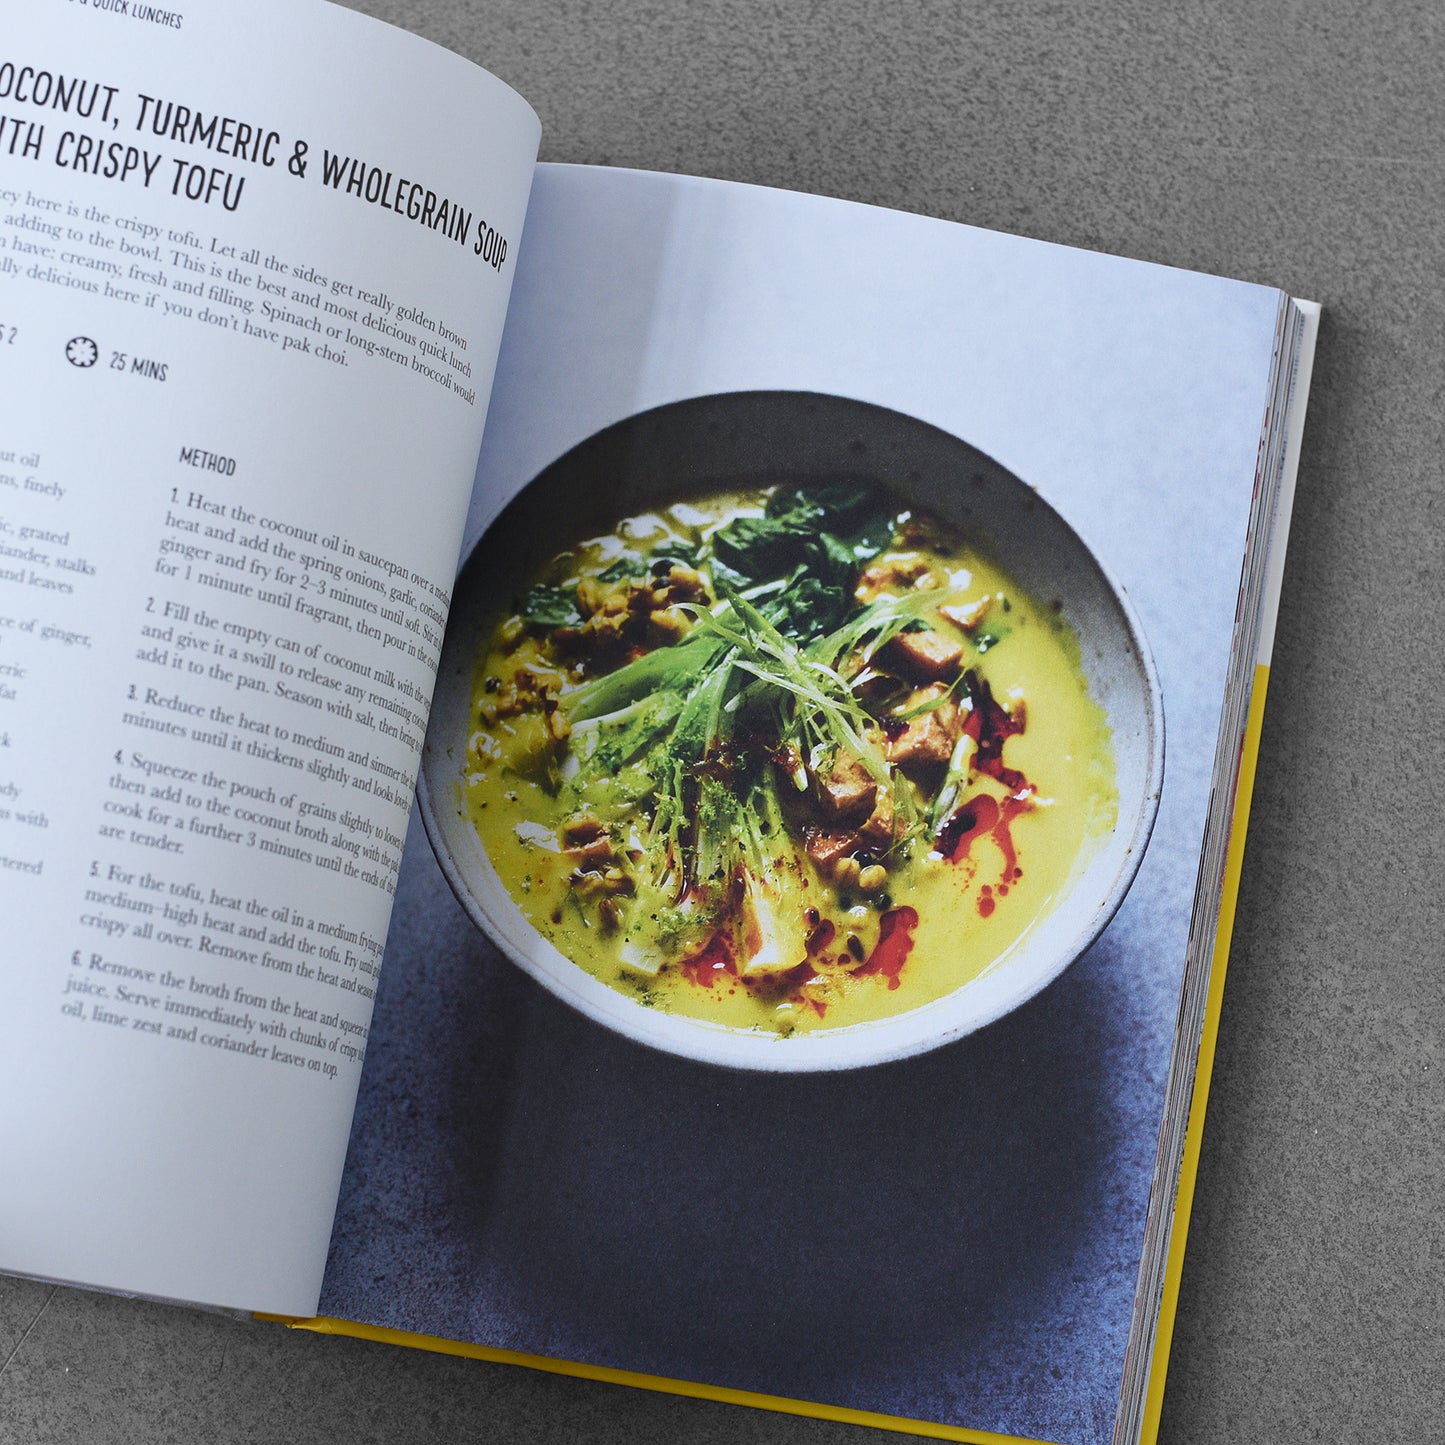 The Simple Plant-Based Cookbook An Appetite for Change with Lentils, Grains and Chestnuts